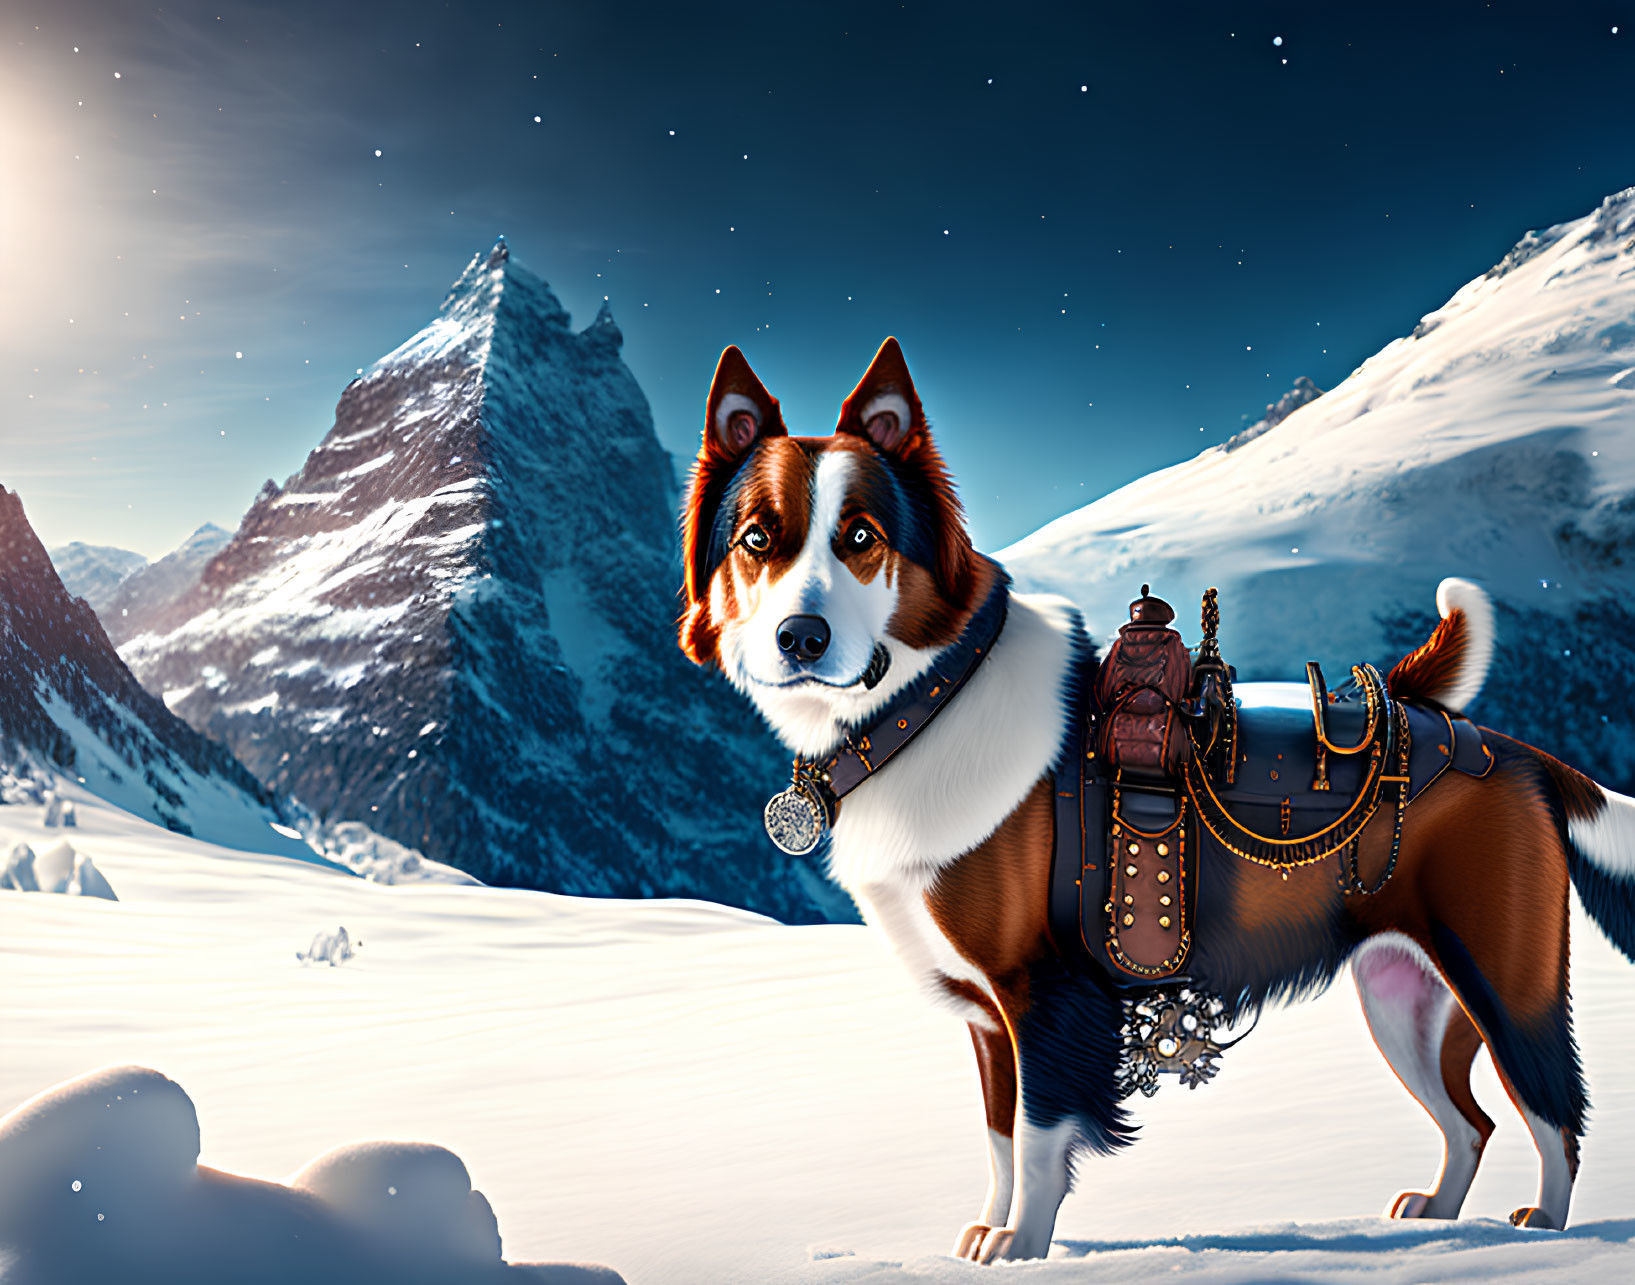 Brown and White Dog with Studded Collar in Snowy Mountain Landscape